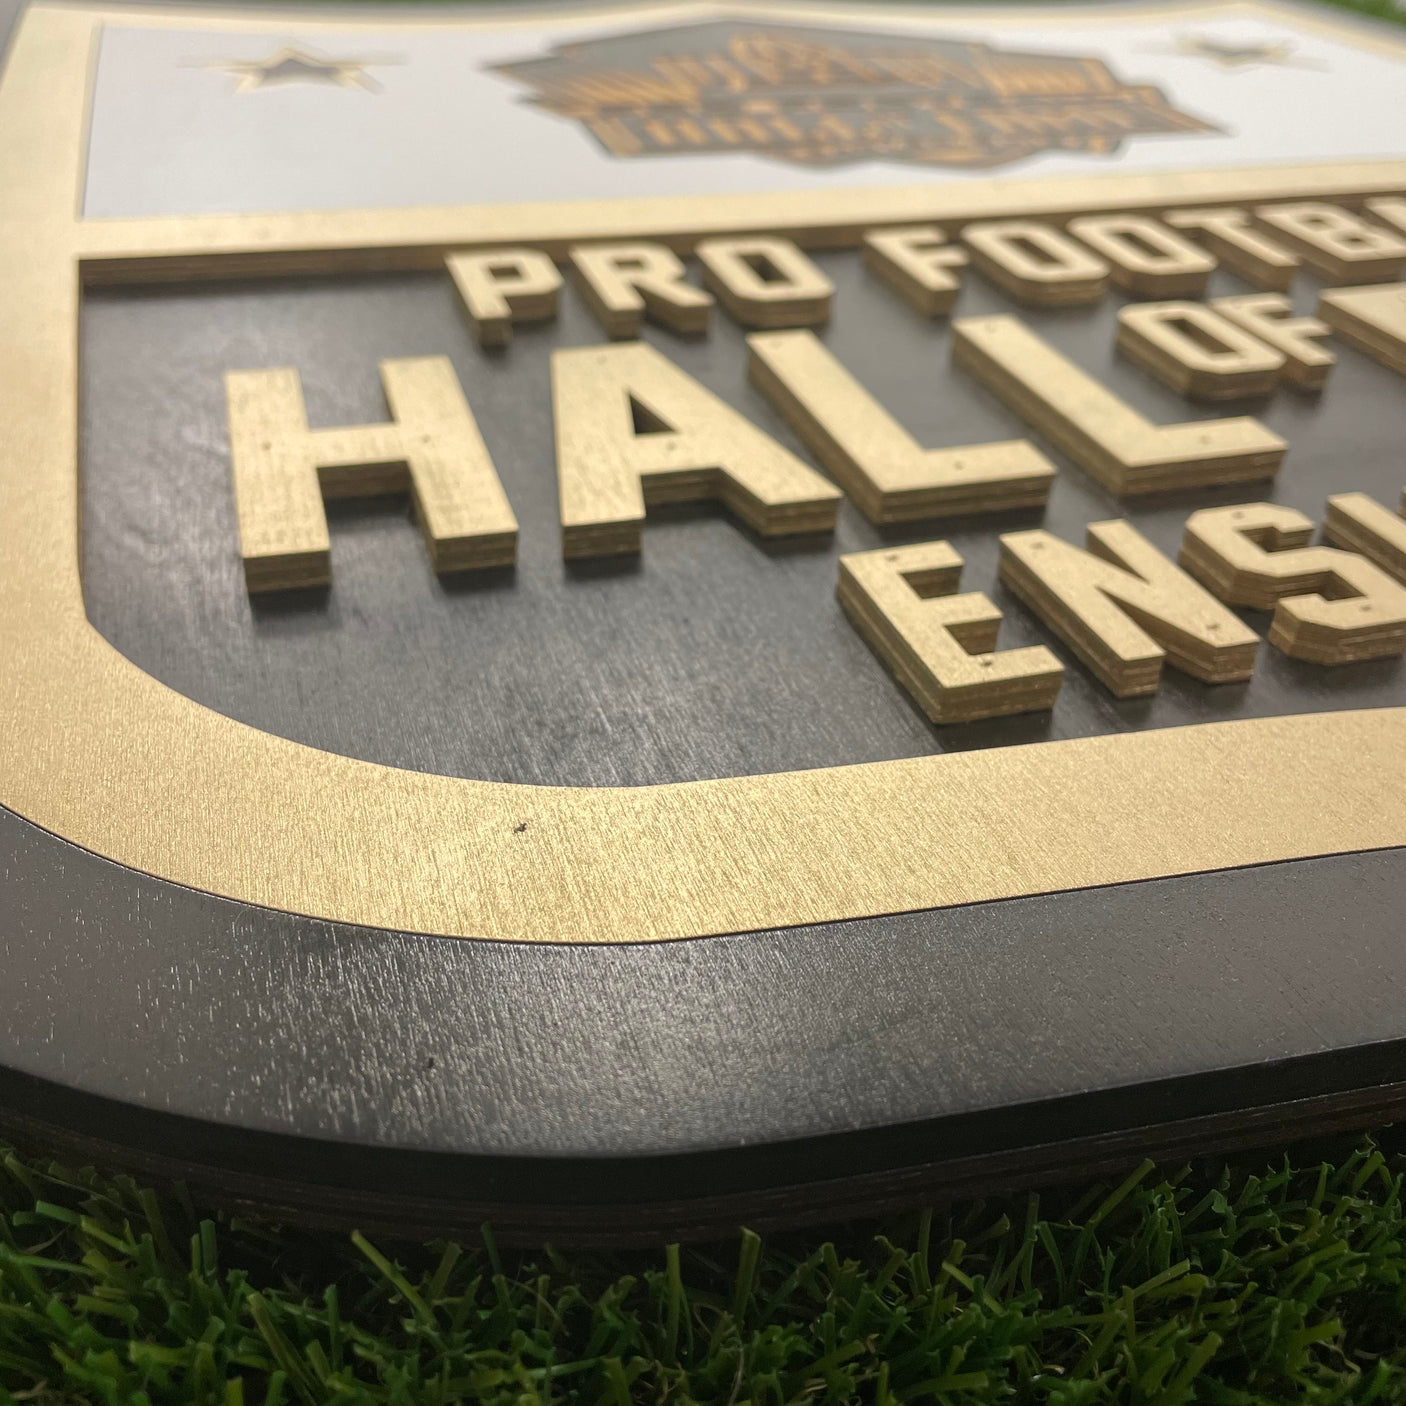 3D Hall Of Fame Enshrinee Patch Wall Sign